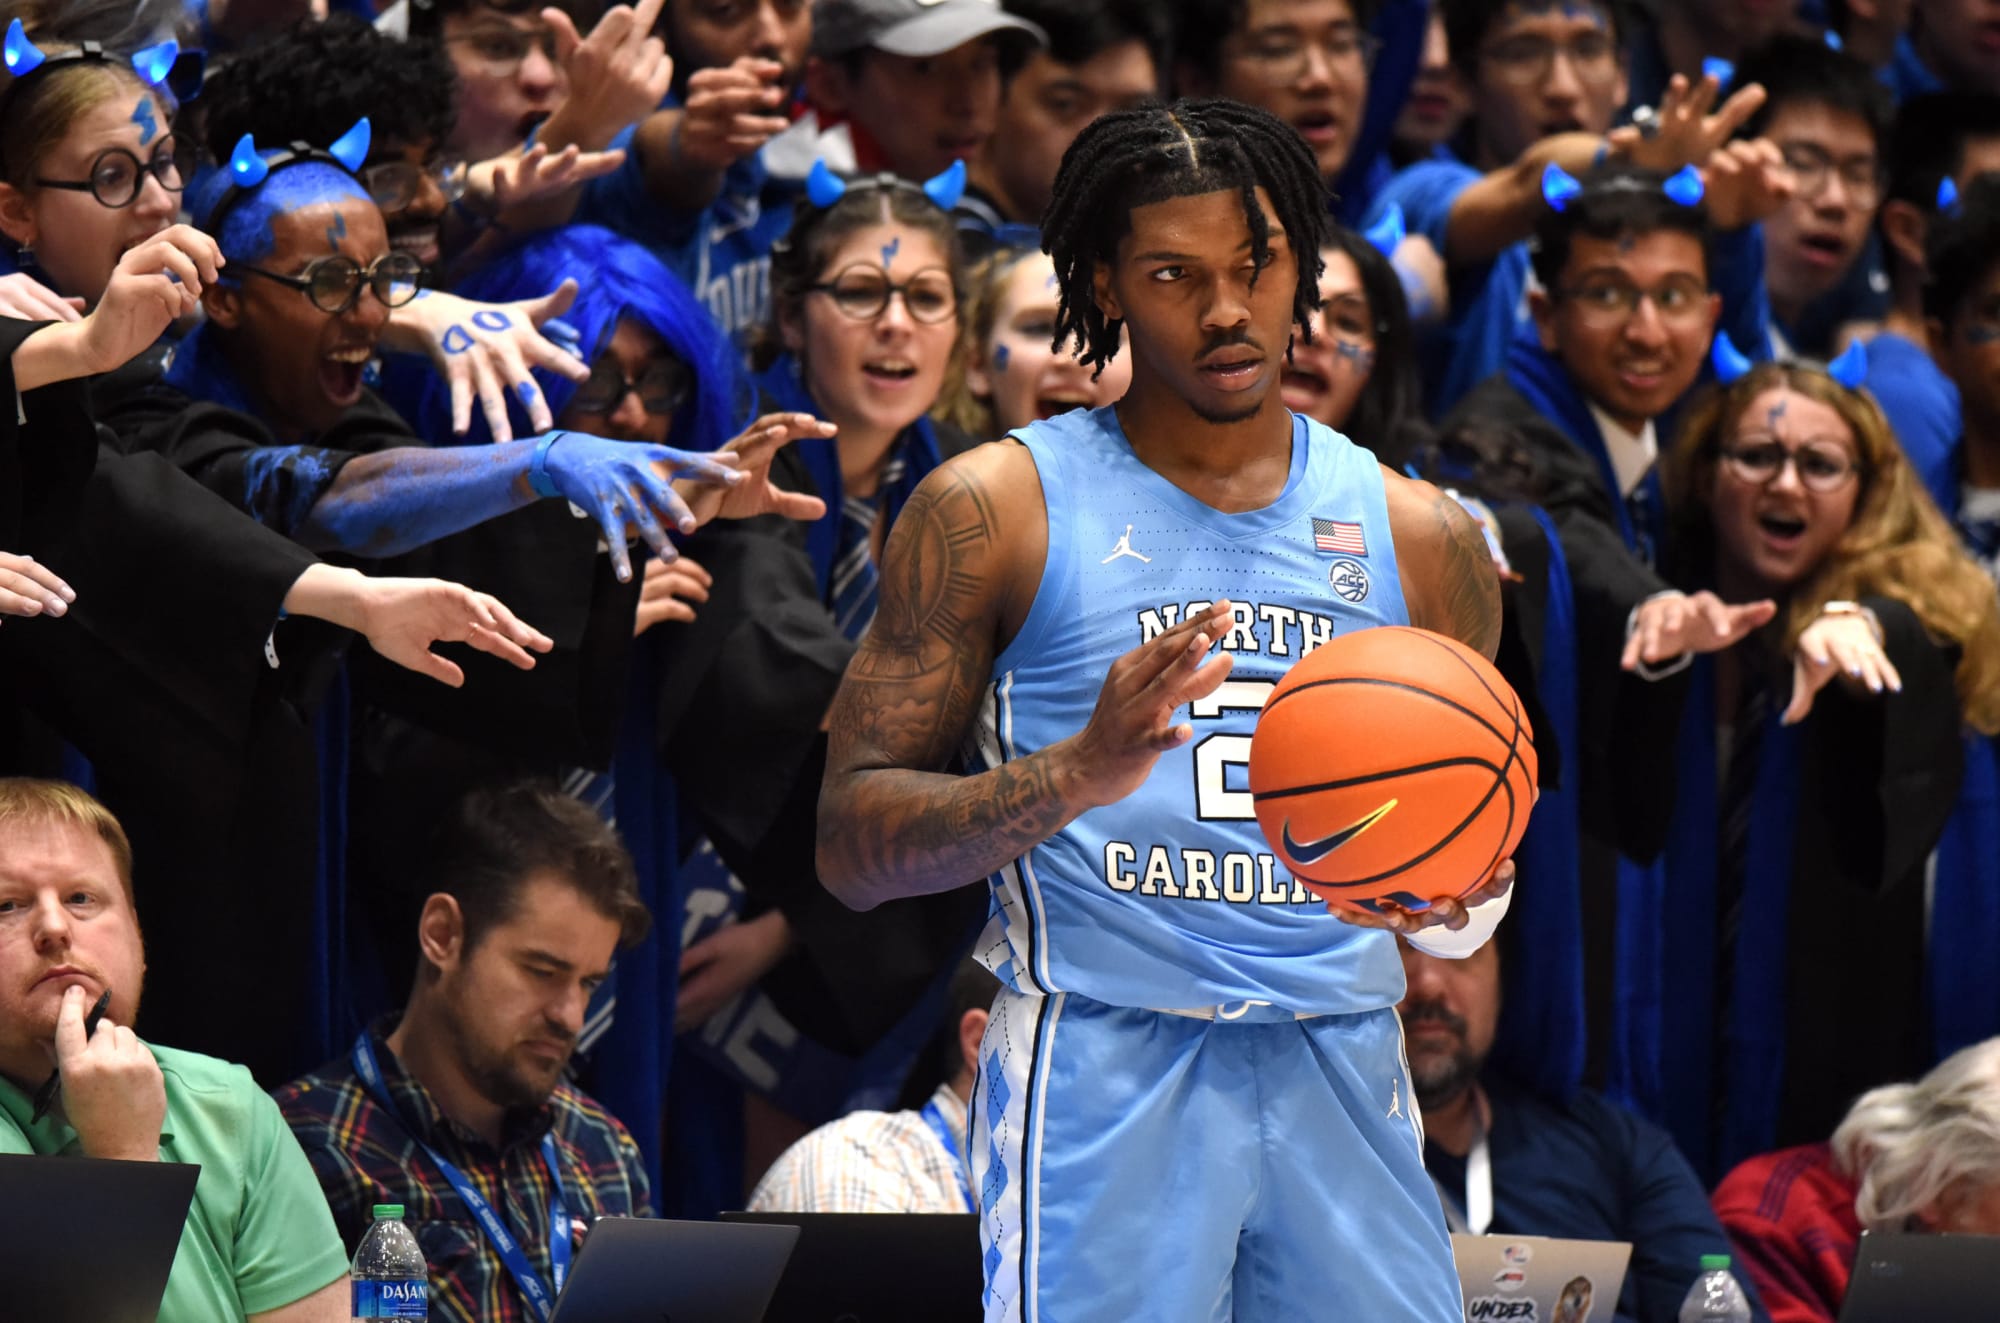 Bracketology predictions: How UNC’s loss to Duke will impact the NCAA Tournament field